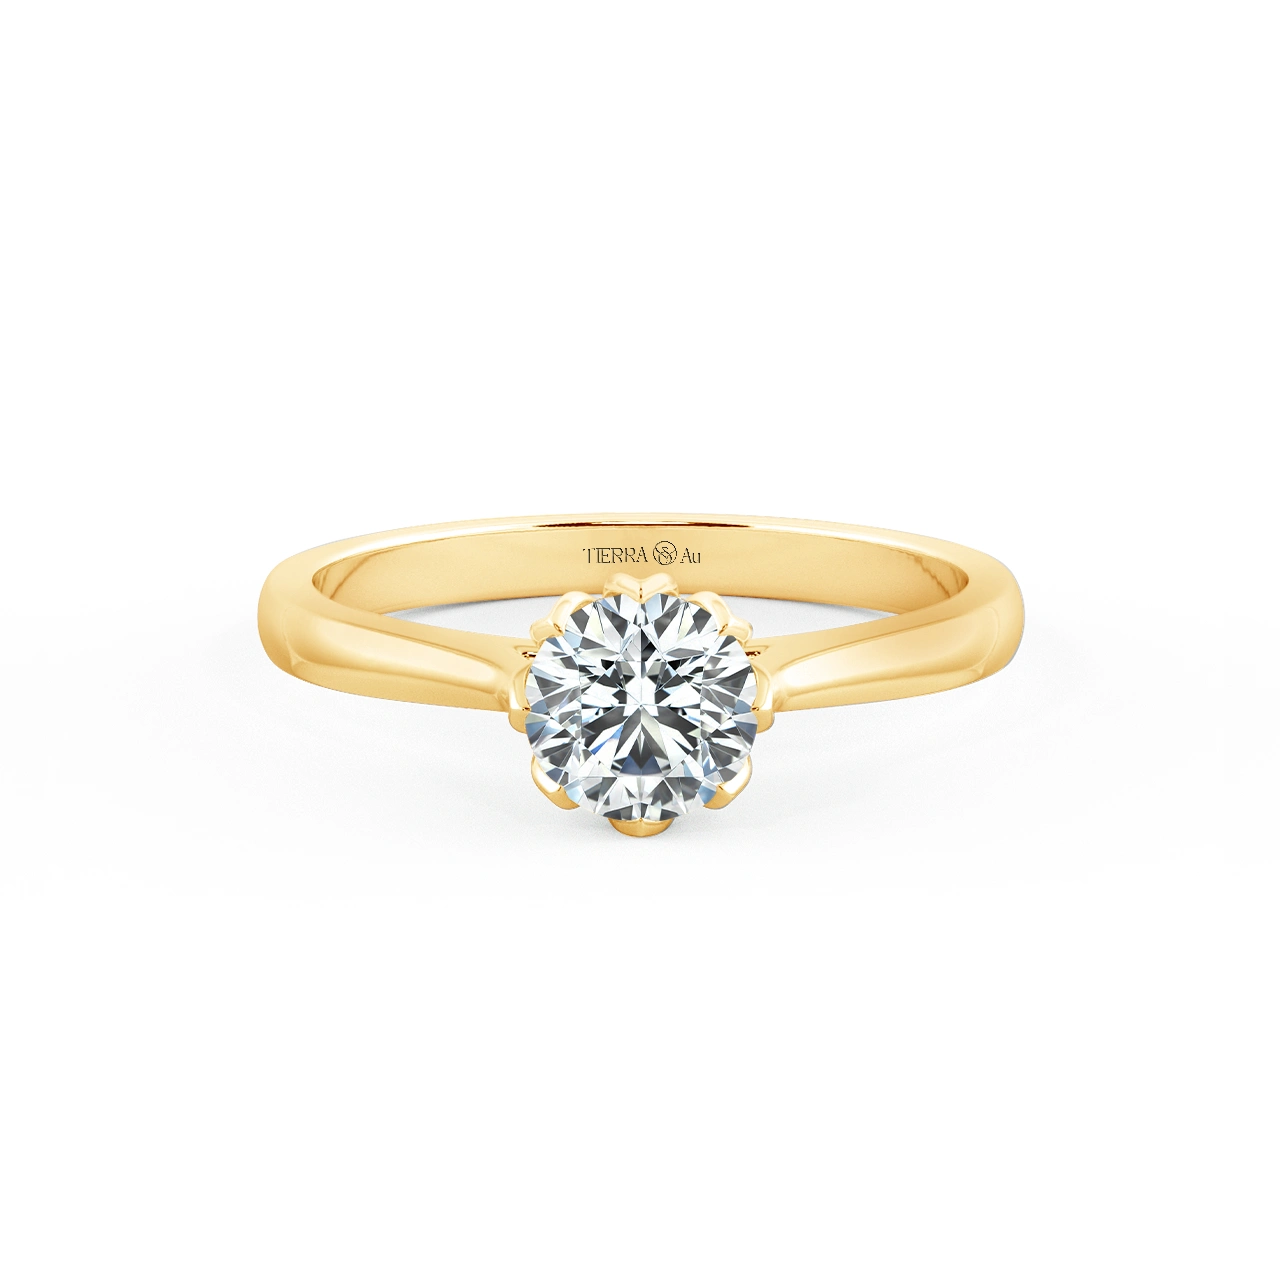 Shiny Floral Cathedral Engagement Ring NCH1513 1